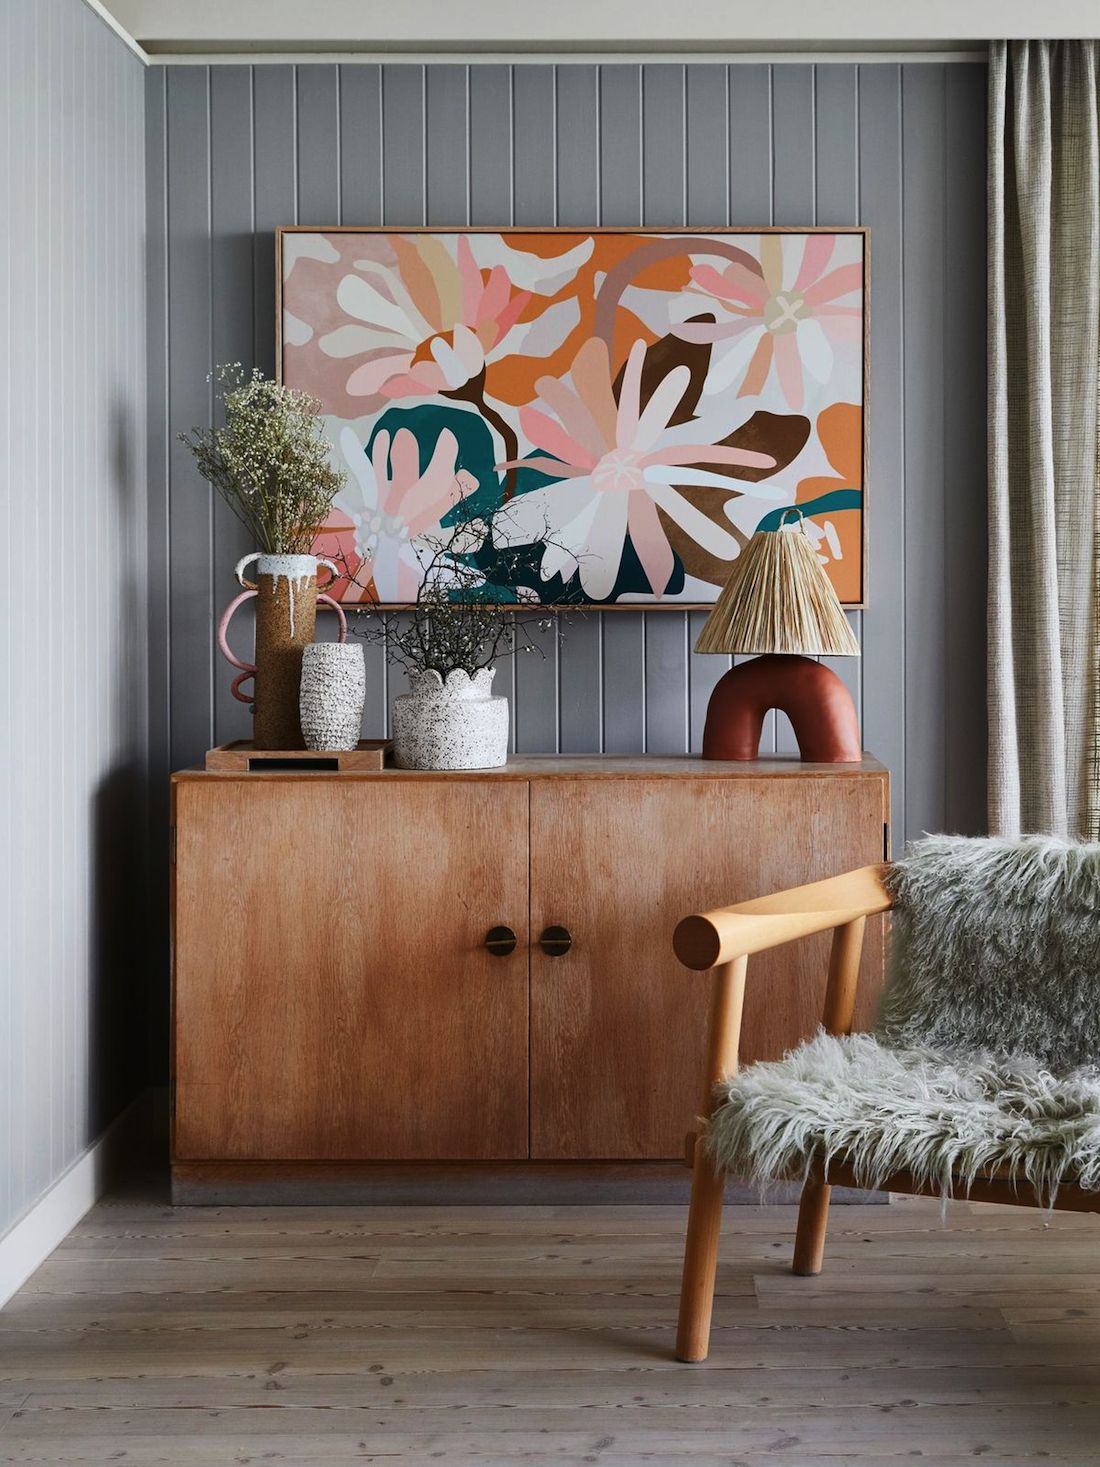 Ceramics atop a sideboard with colourful artwork and fluffy chair